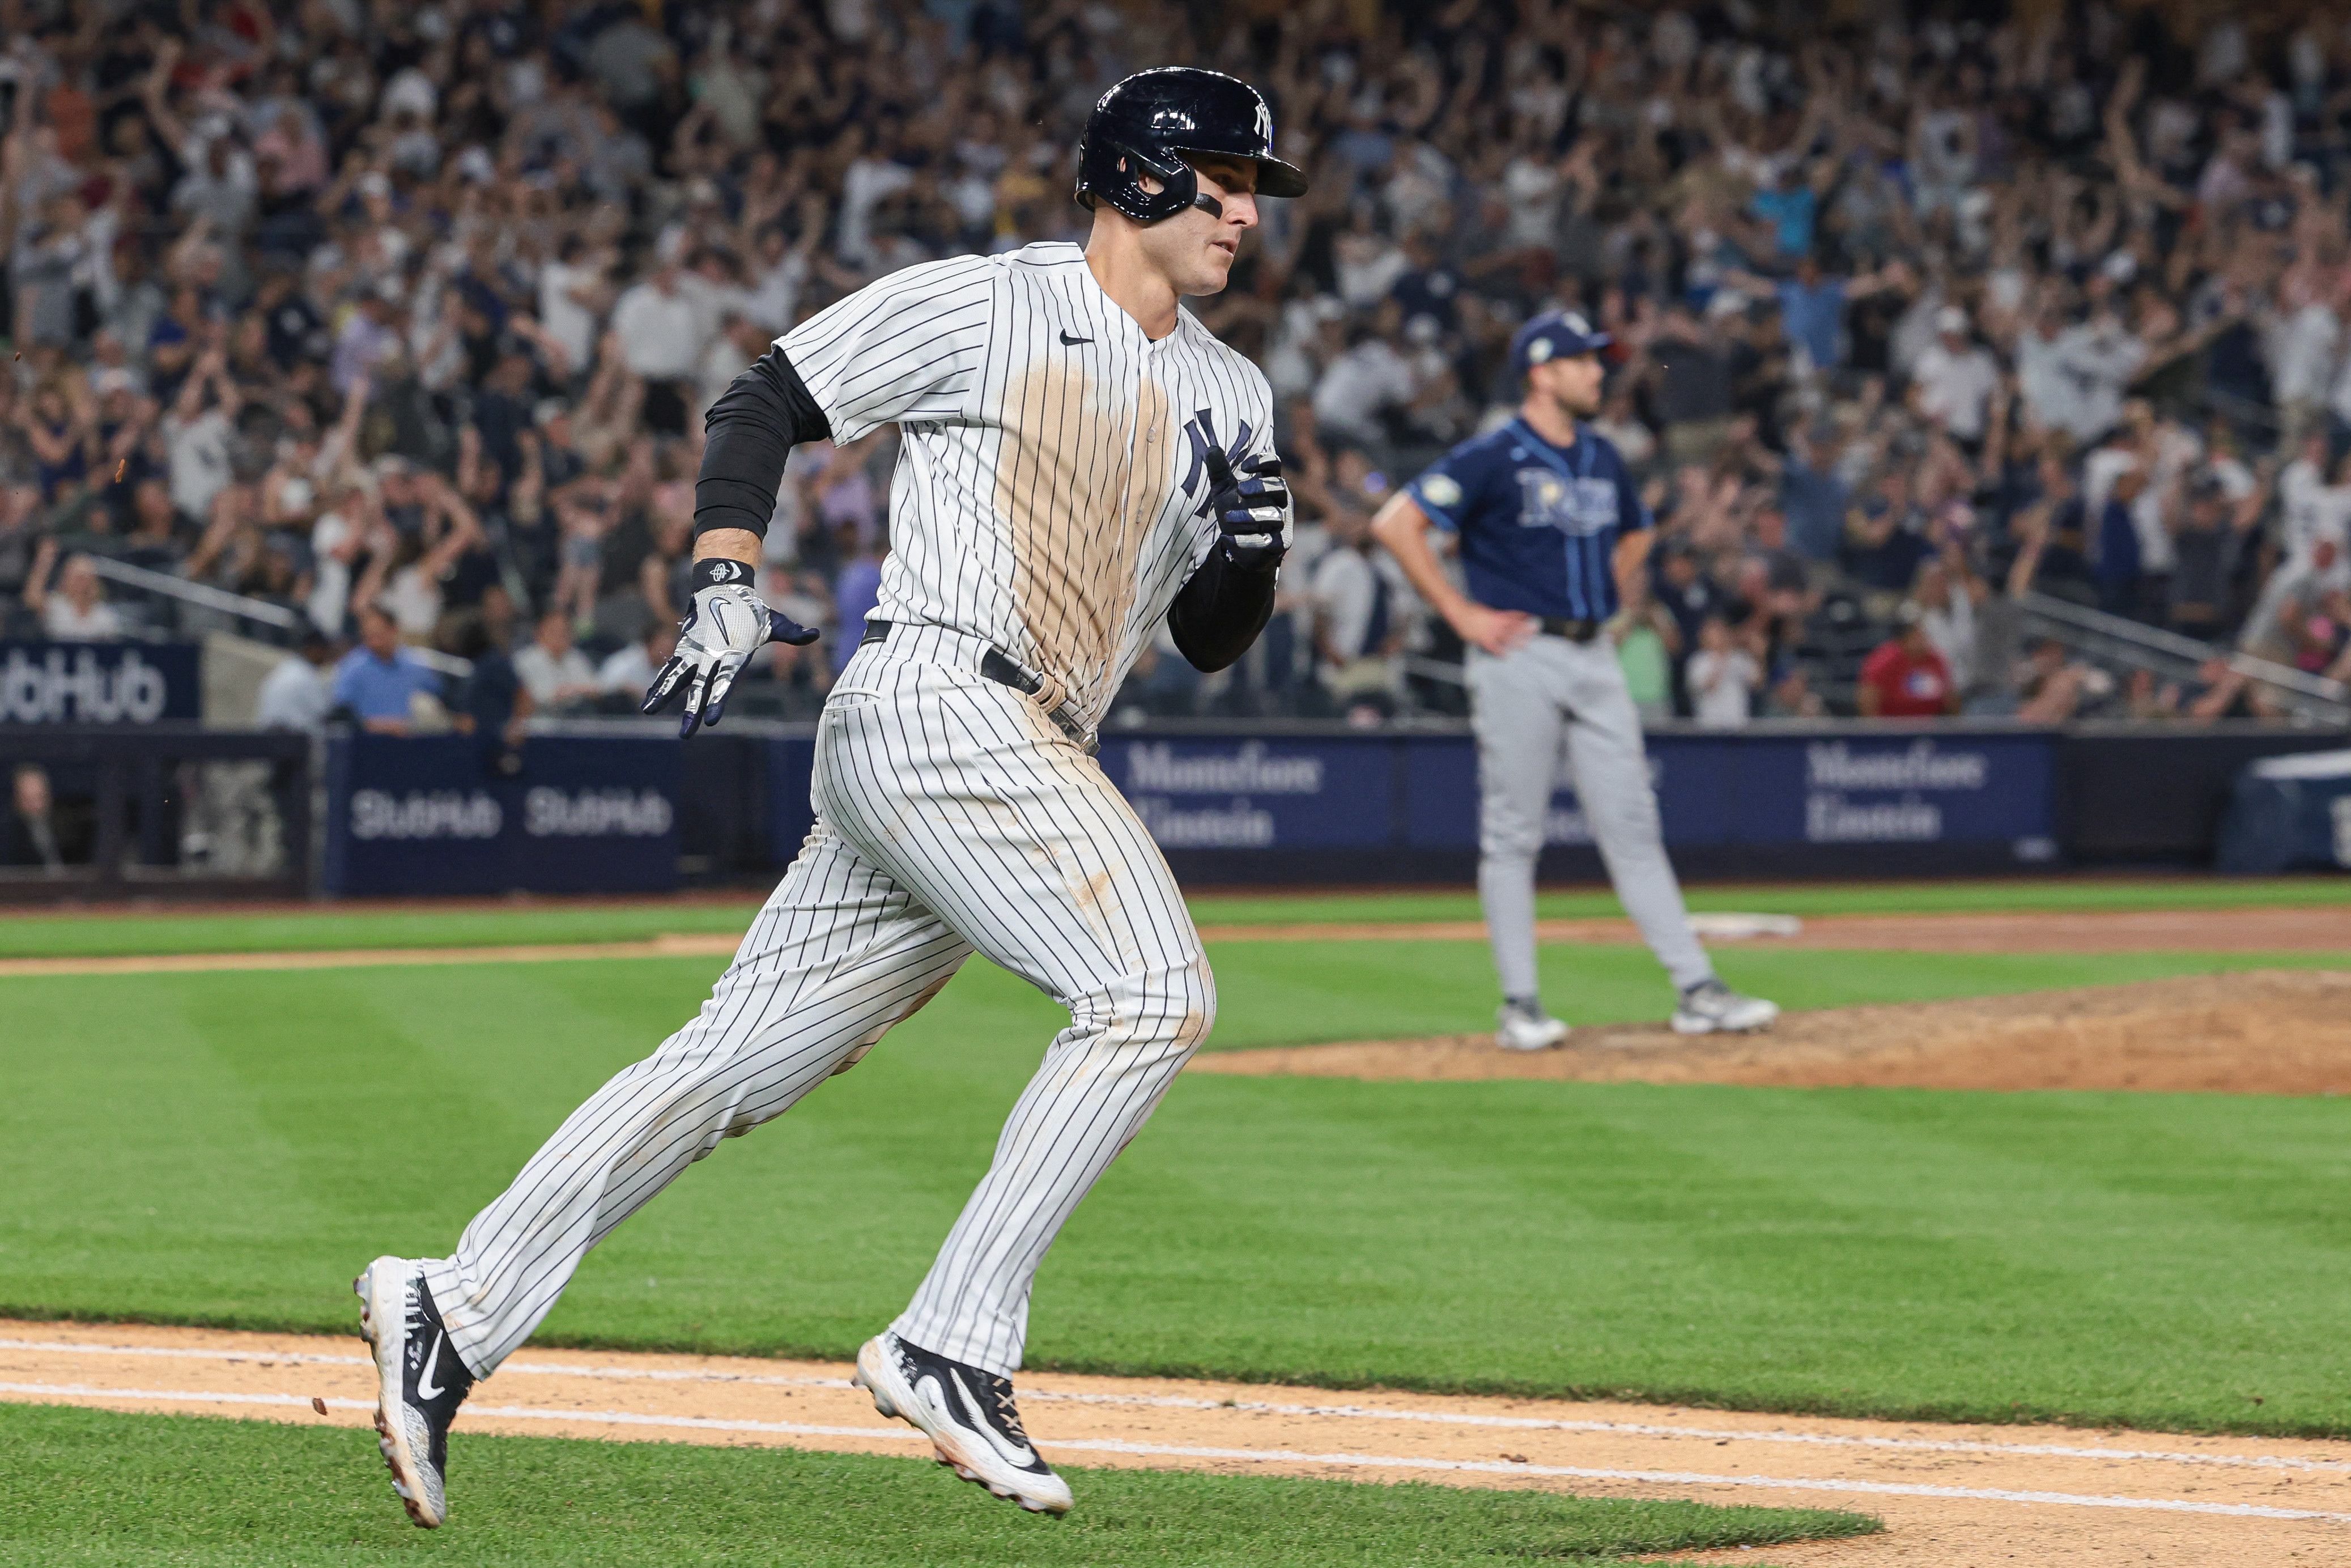 Anthony Rizzo walk-off gives New York Yankees win over Rays